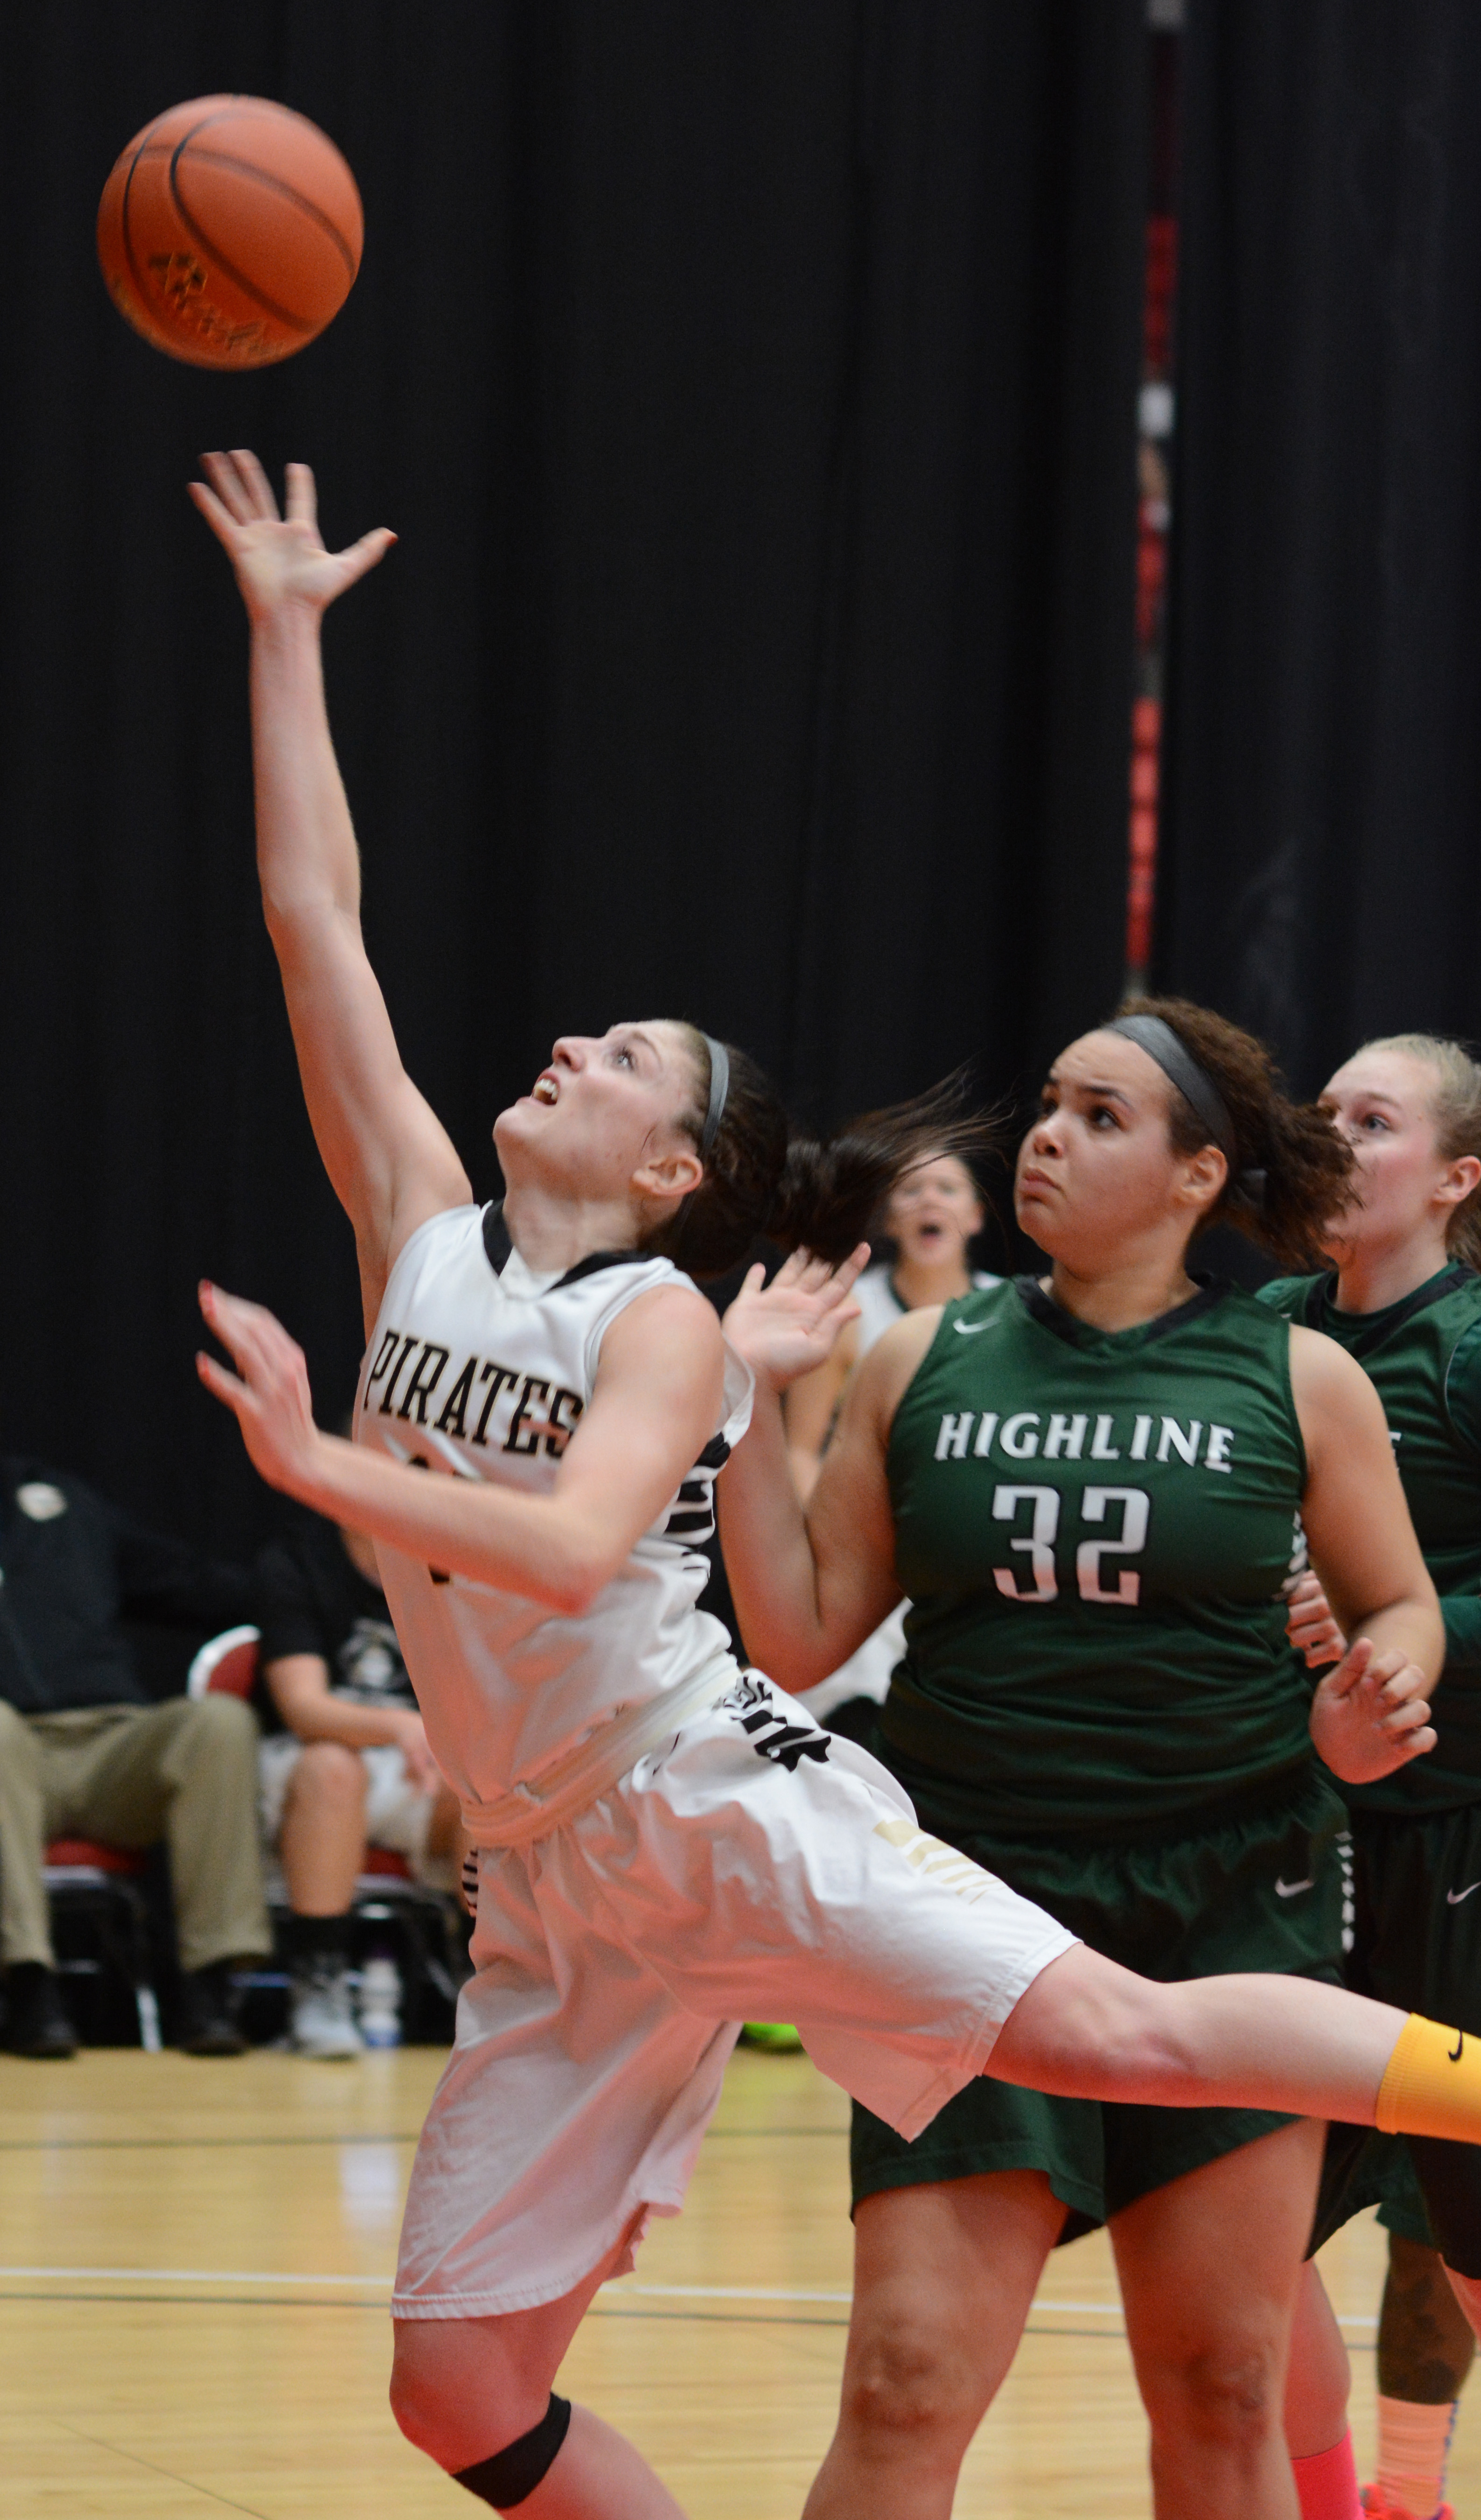 Peninsula's Madison Pilster puts up a layup in front of the defense of Highline's Ionna Price during the NWAC tournament. (Rick Ross/Peninsula College)